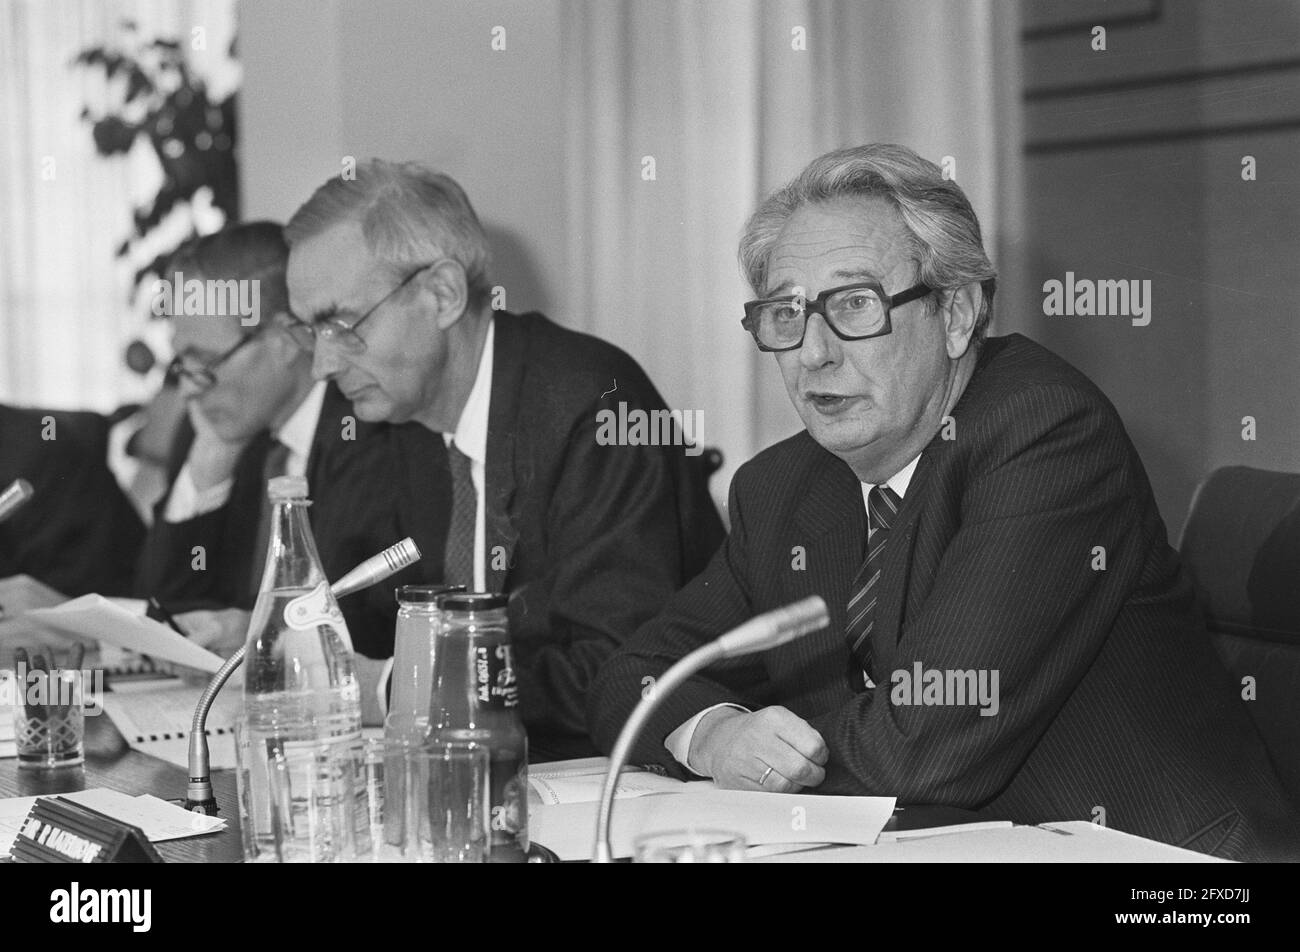 Presentation of annual figures of ABN bank, chairman of the executive board drs. R. Hazelhoff, assignment Financieel Dagblad, 6 March 1987, chairmen, The Netherlands, 20th century press agency photo, news to remember, documentary, historic photography 1945-1990, visual stories, human history of the Twentieth Century, capturing moments in time Stock Photo